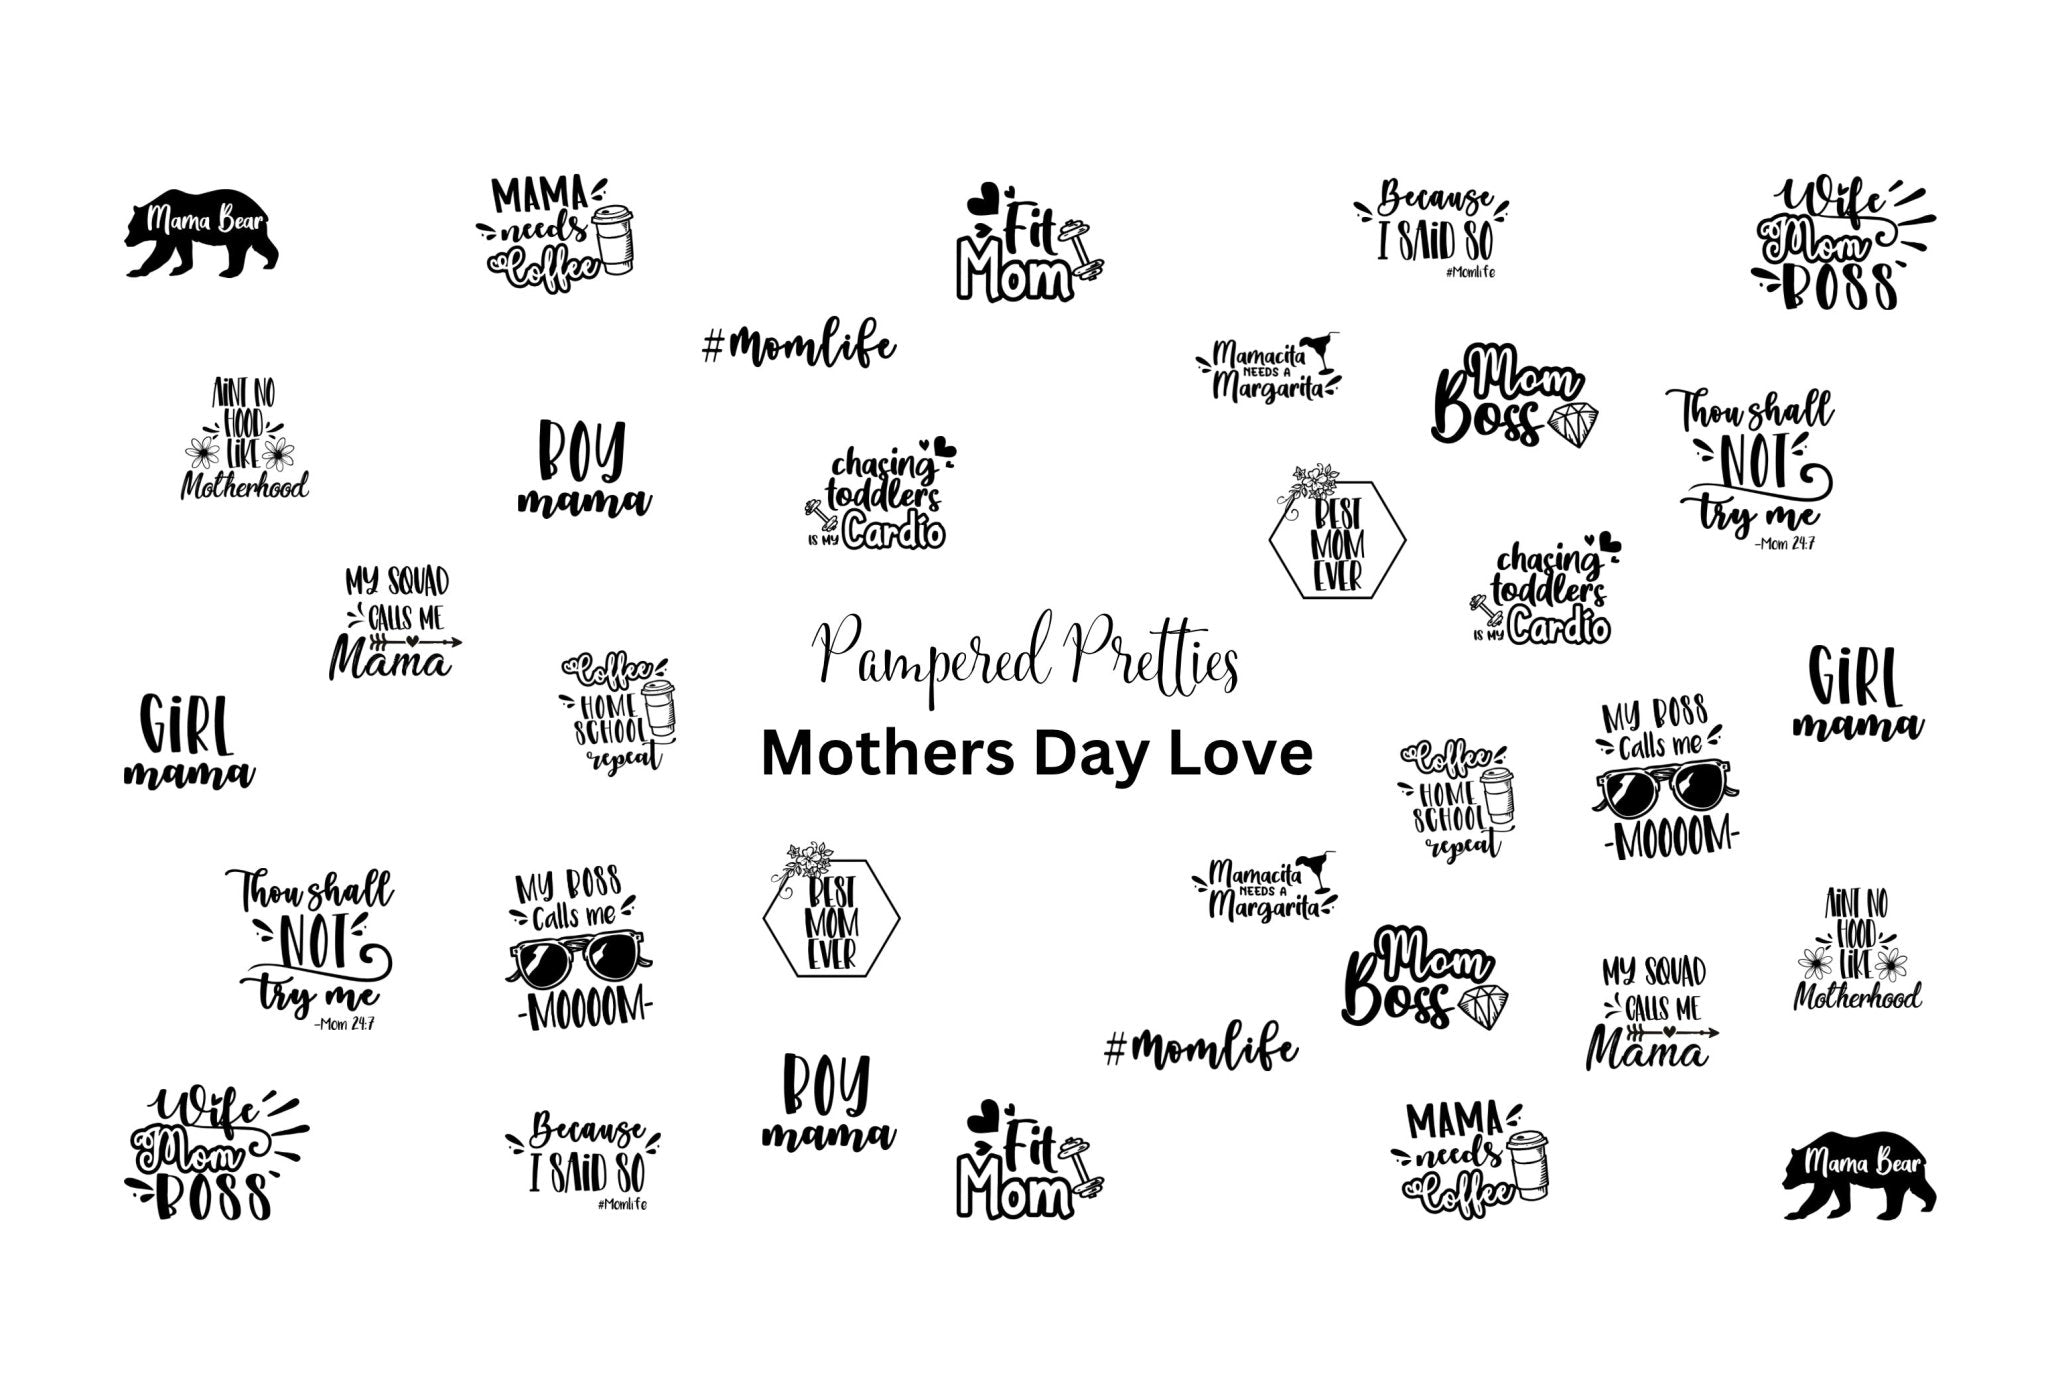 Mother’s Day Love - Pampered Pretties